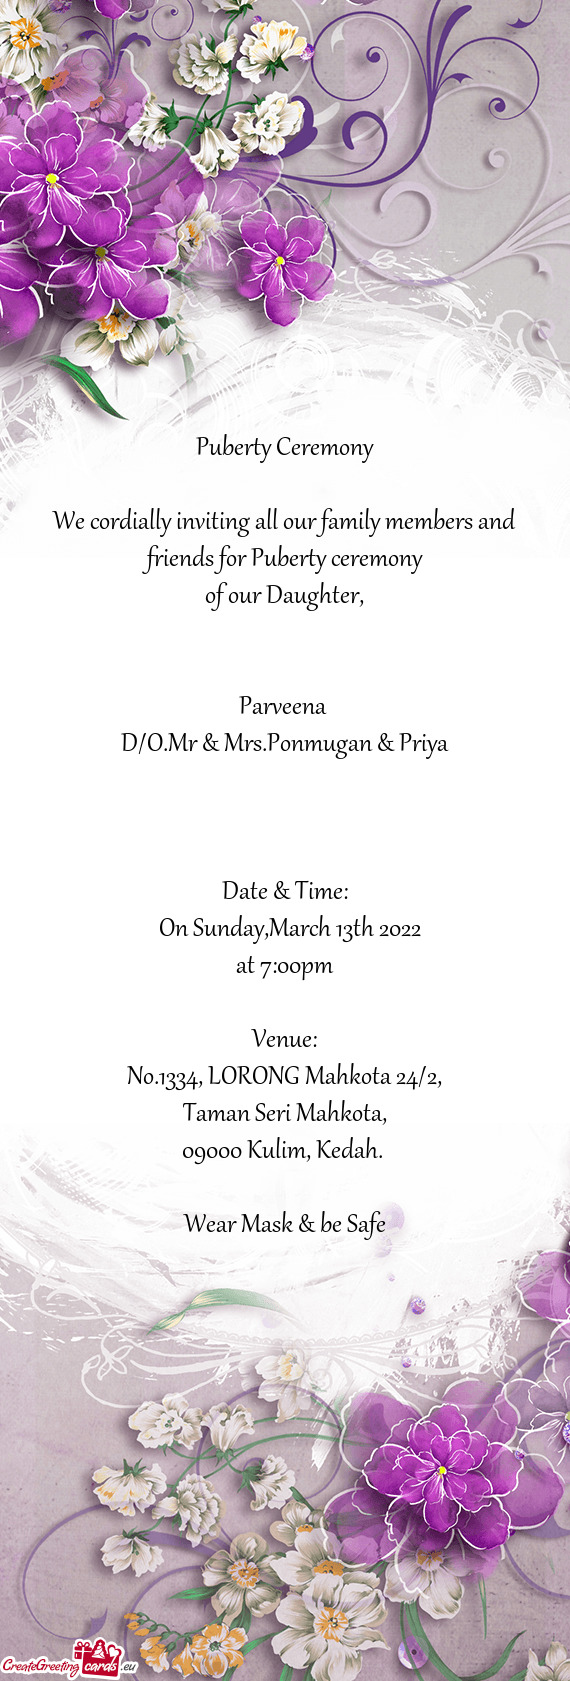 We cordially inviting all our family members and friends for Puberty ceremony